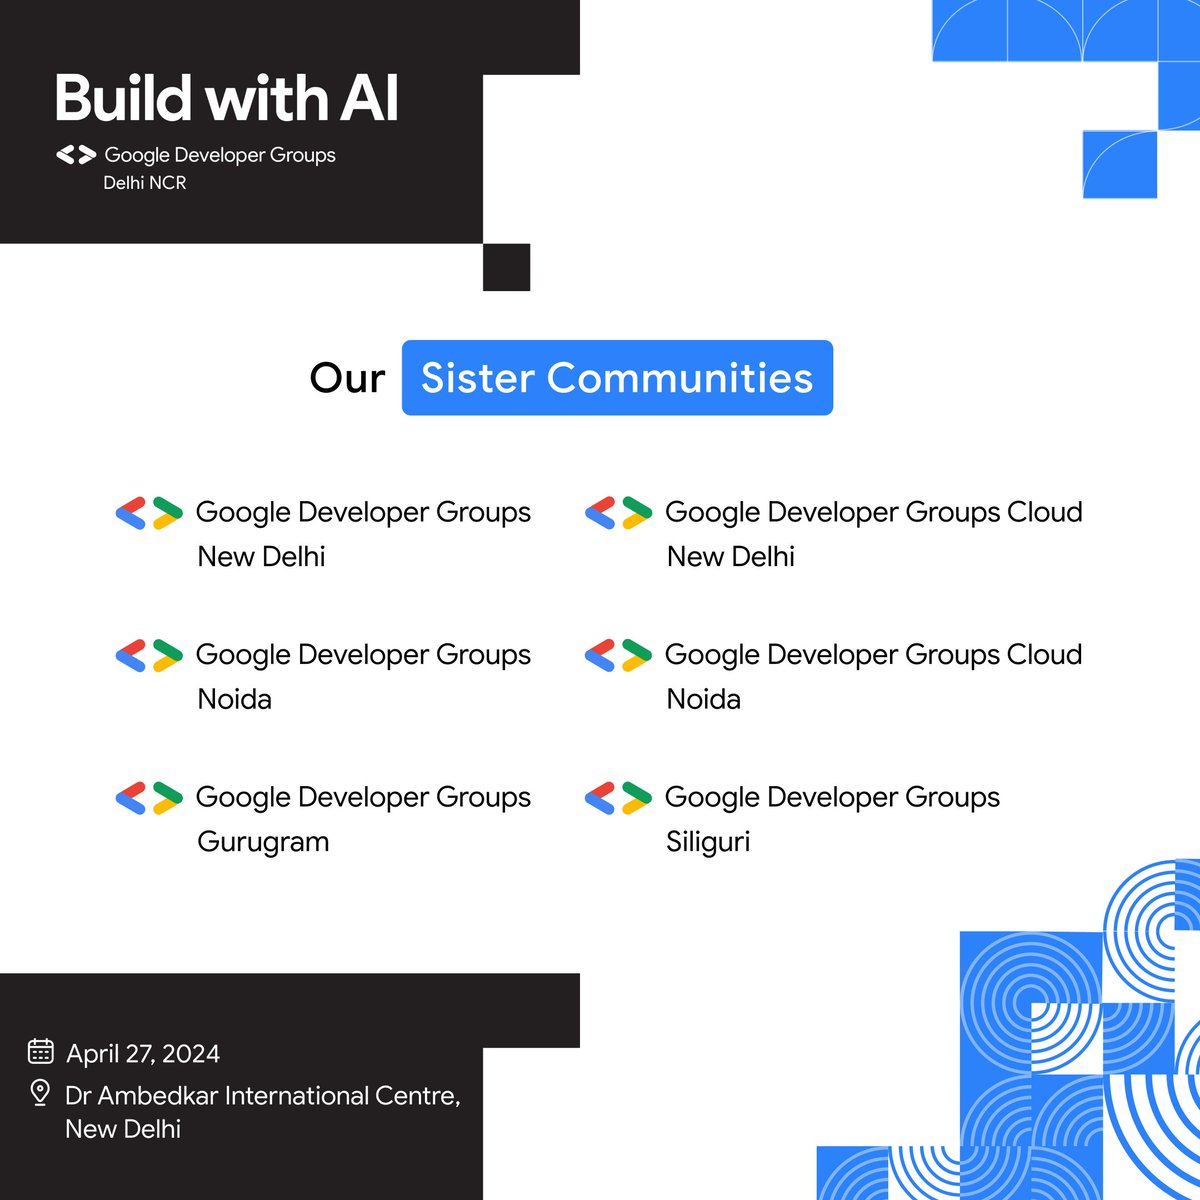 Introducing our sister communities joining forces for the ultimate AI extravaganza! 🌟 Join GDG New Delhi, GDG Cloud New Delhi, GDG Noida, GDG Cloud Noida, GDG Gurugram, and GDG Siliguri as we dive into the future at the 'Build With AI Roadshow'! 🔥 #AIRevolution #CommunityUnity